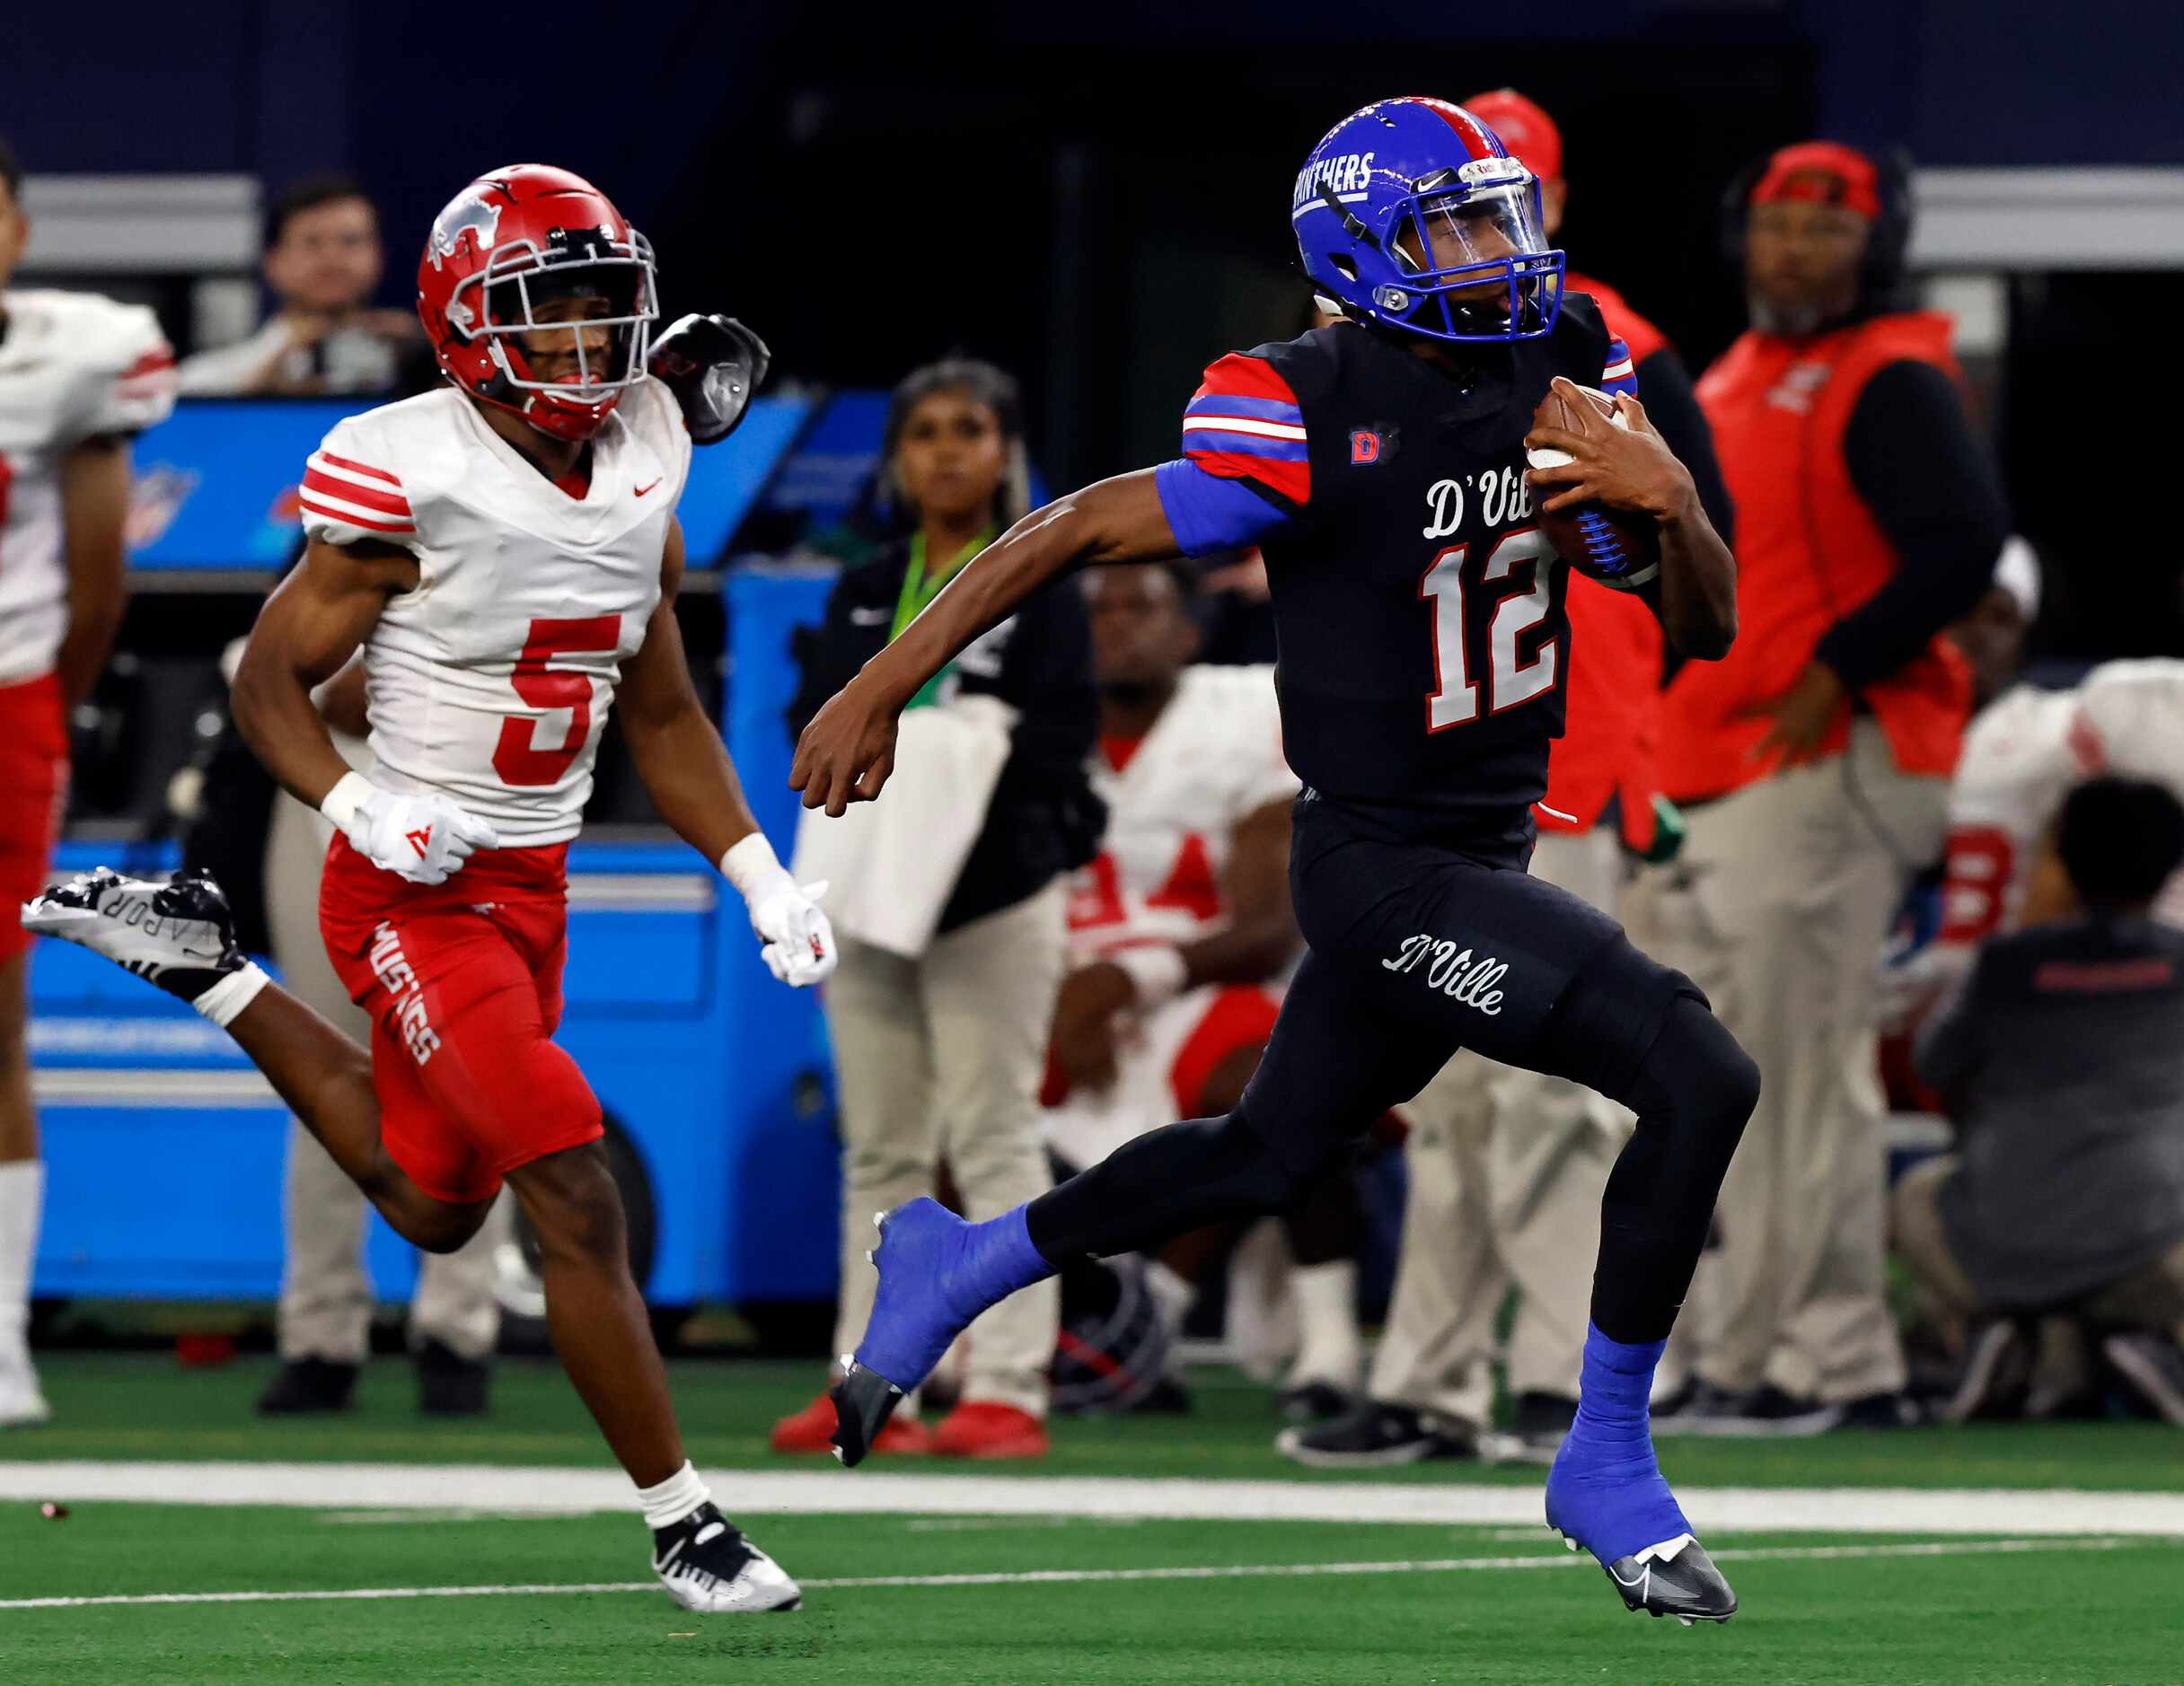 Duncanville quarterback Keelon Russell (12) cruises to a second quarter touchdown against...